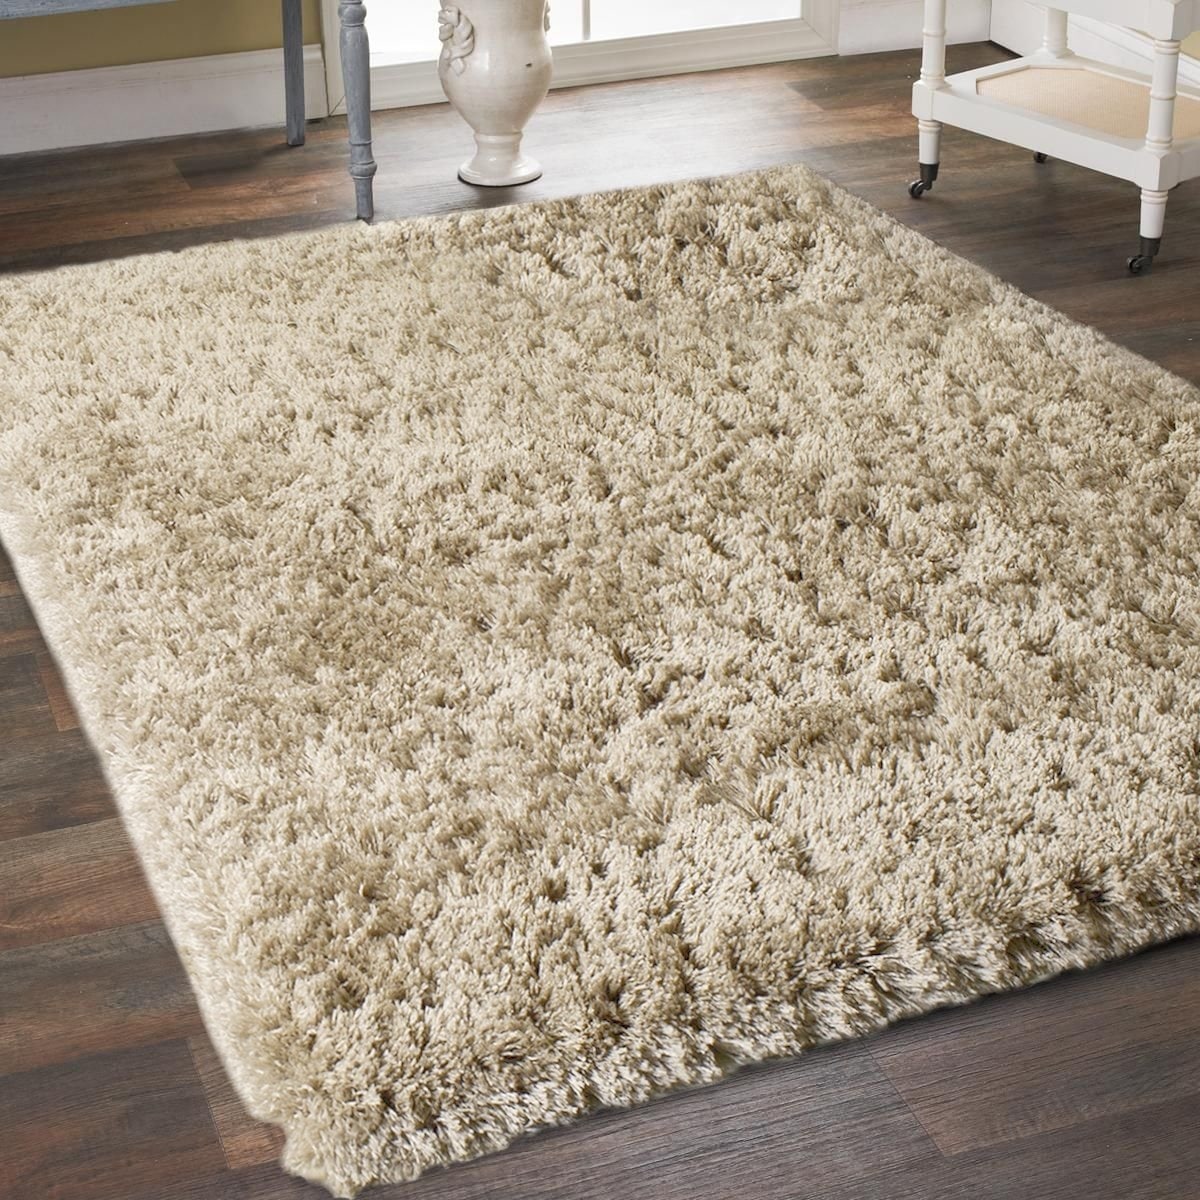 SHAGGY new 5CM THICK PILE HIGH QUALITY BUDGET COSY SHAGGY RUG SALE clearance 